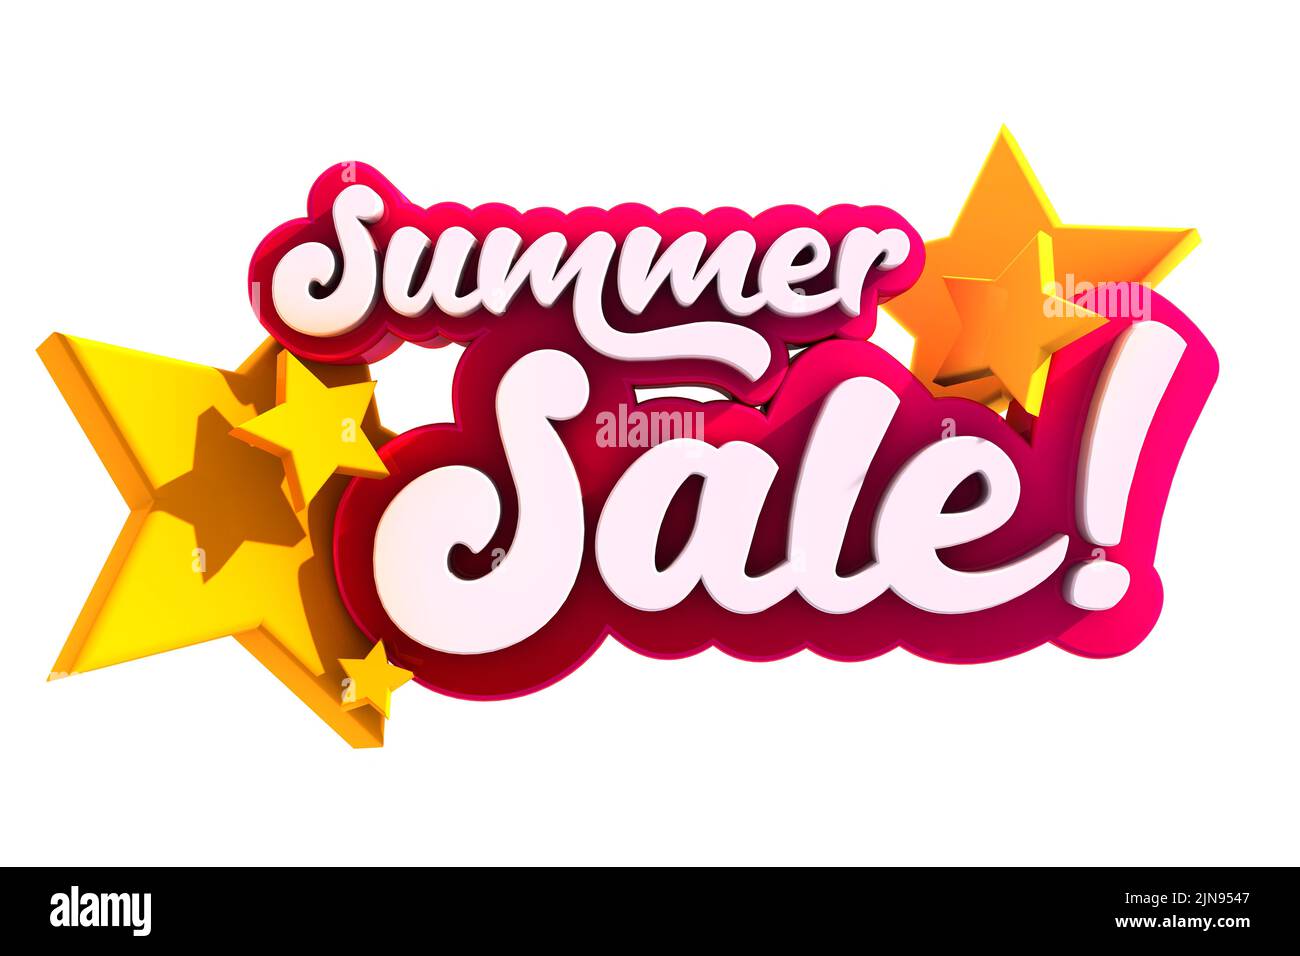 Summer sale banner with yellow stars. 3d rendering sign isolated on white. Stock Photo